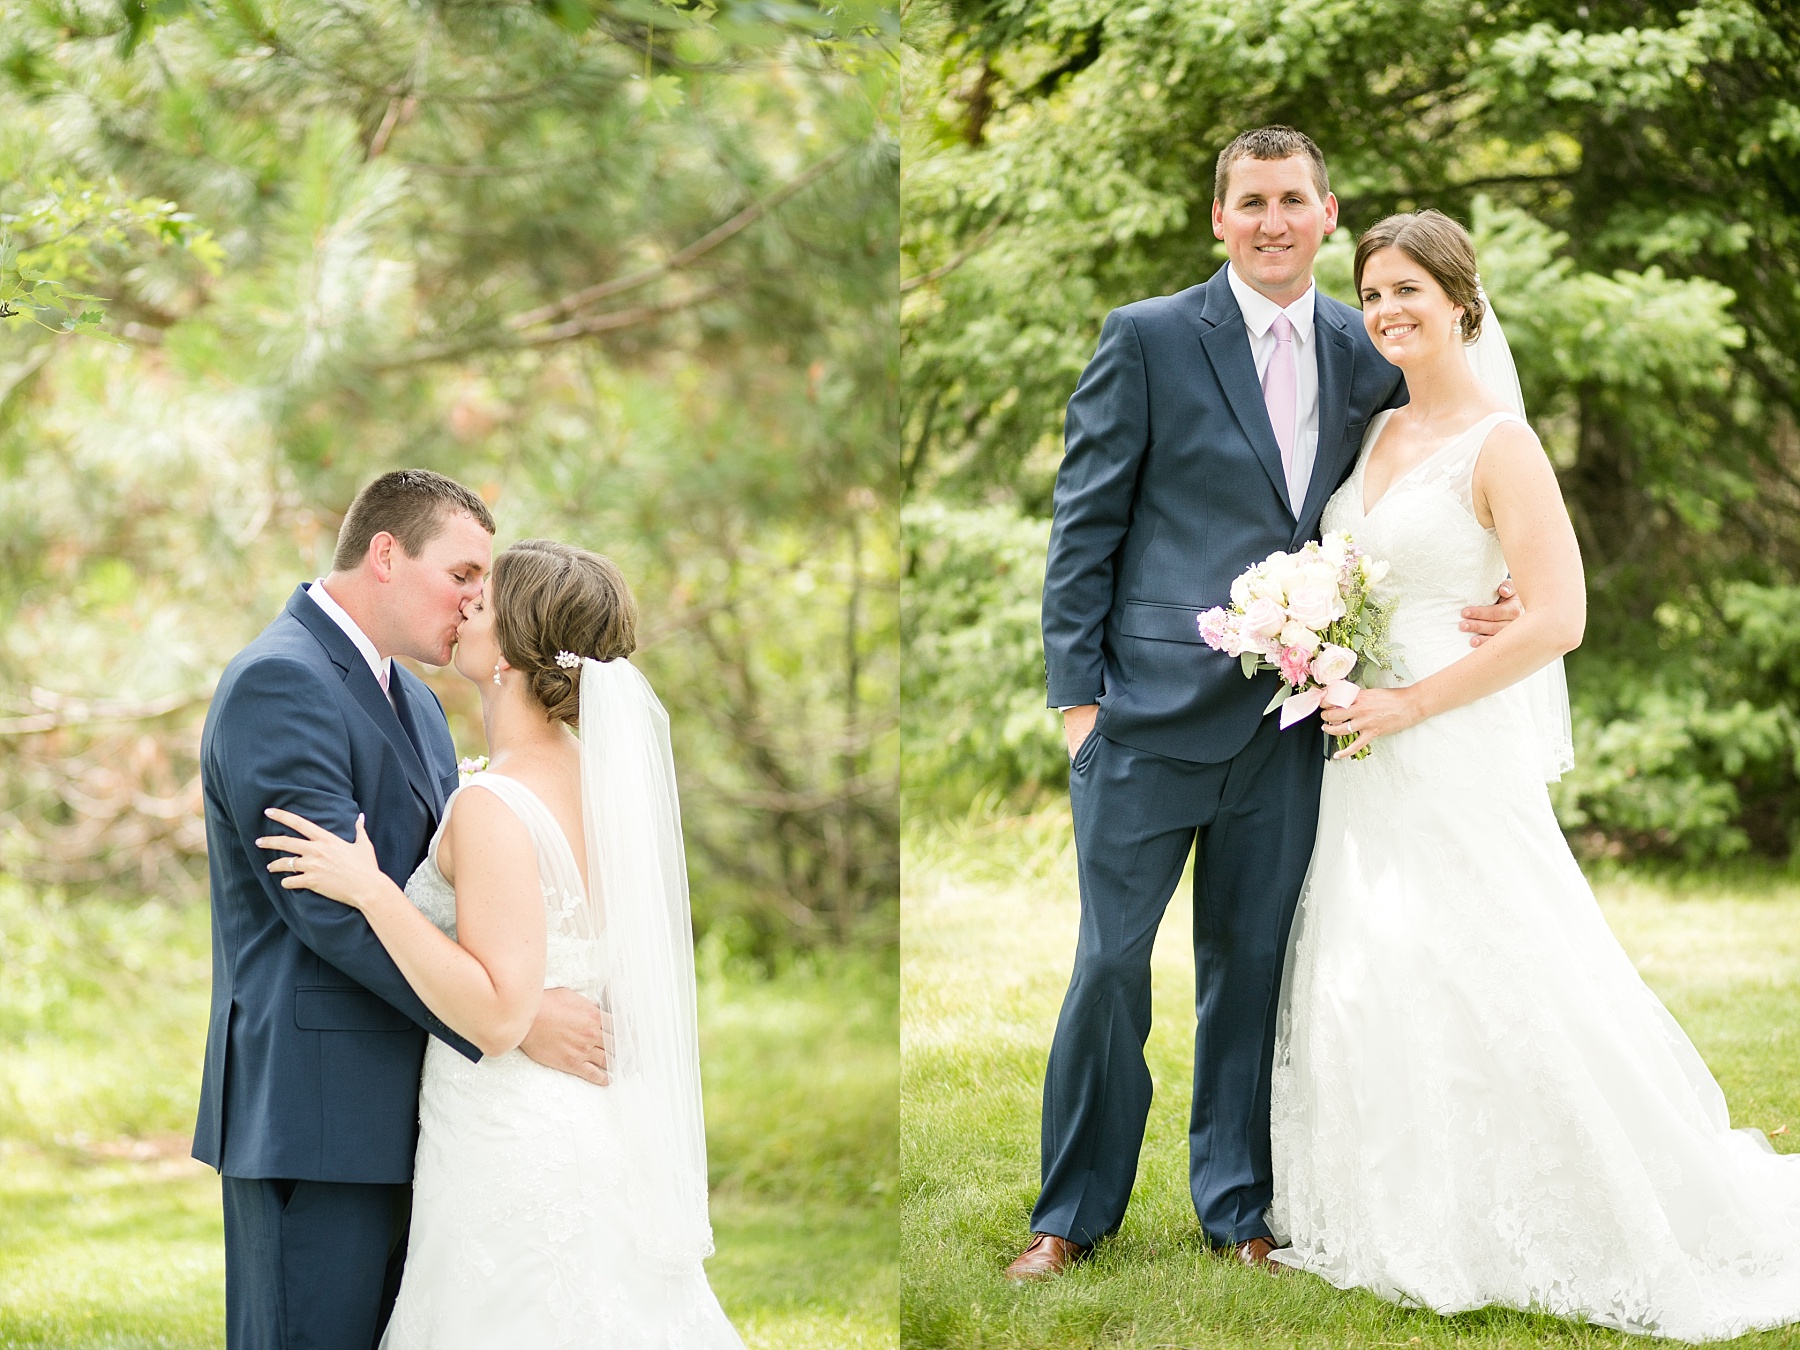 Maureen & Jamie were married on the shores of Little Saint Germain Lake, pouring rain & gale force winds couldn't stop them both from smiling from ear to ear.